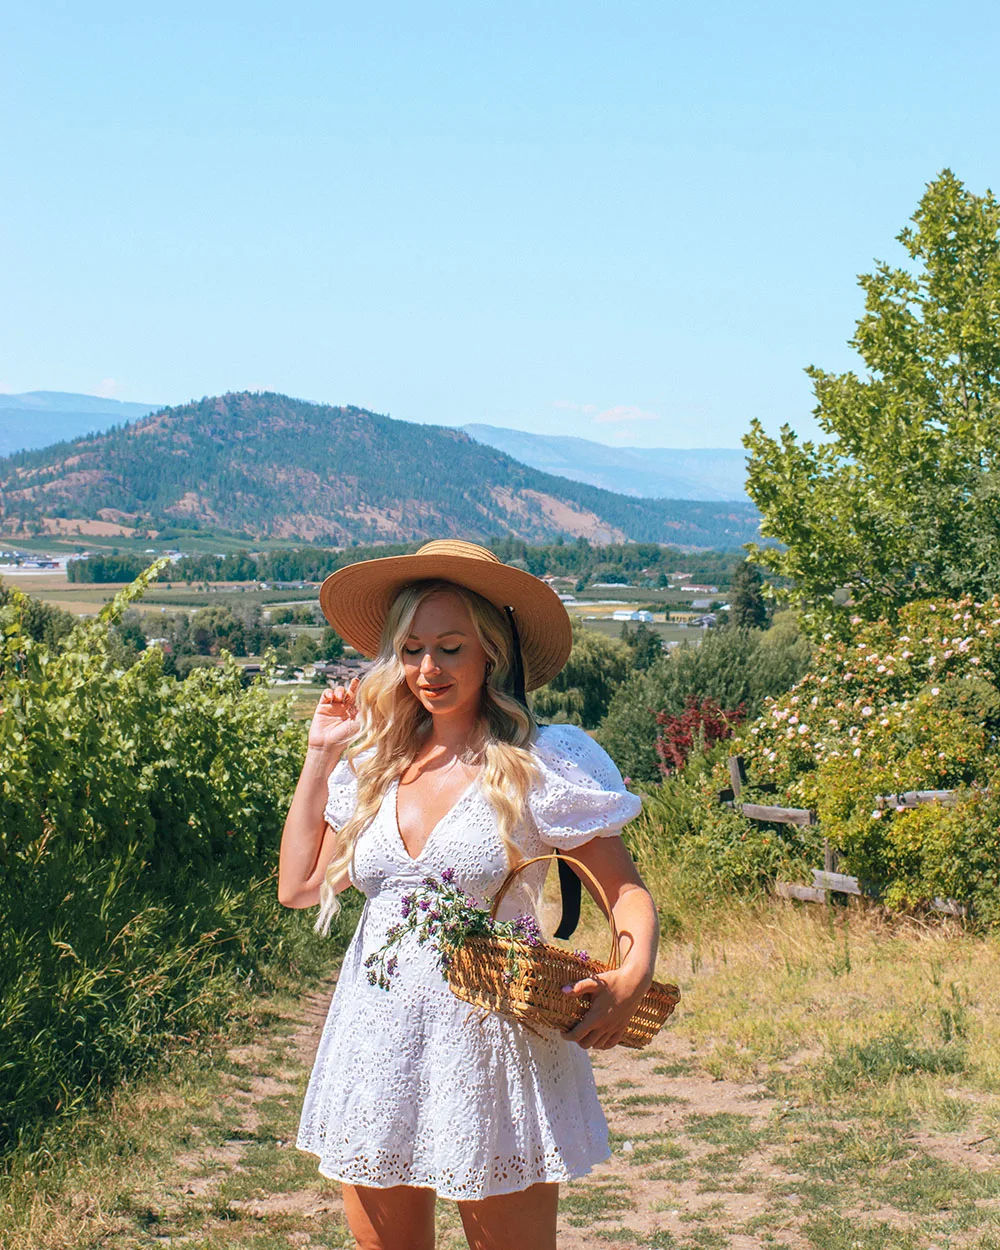 Planning a trip to Kelowna soon? This guide covers all the best things to do in Kelowna from a locals perspective! From wineries and cideries, to adventure activities, hikes, waters sports and more. This guide has everything you need to plan your visit to beautiful Kelowna!